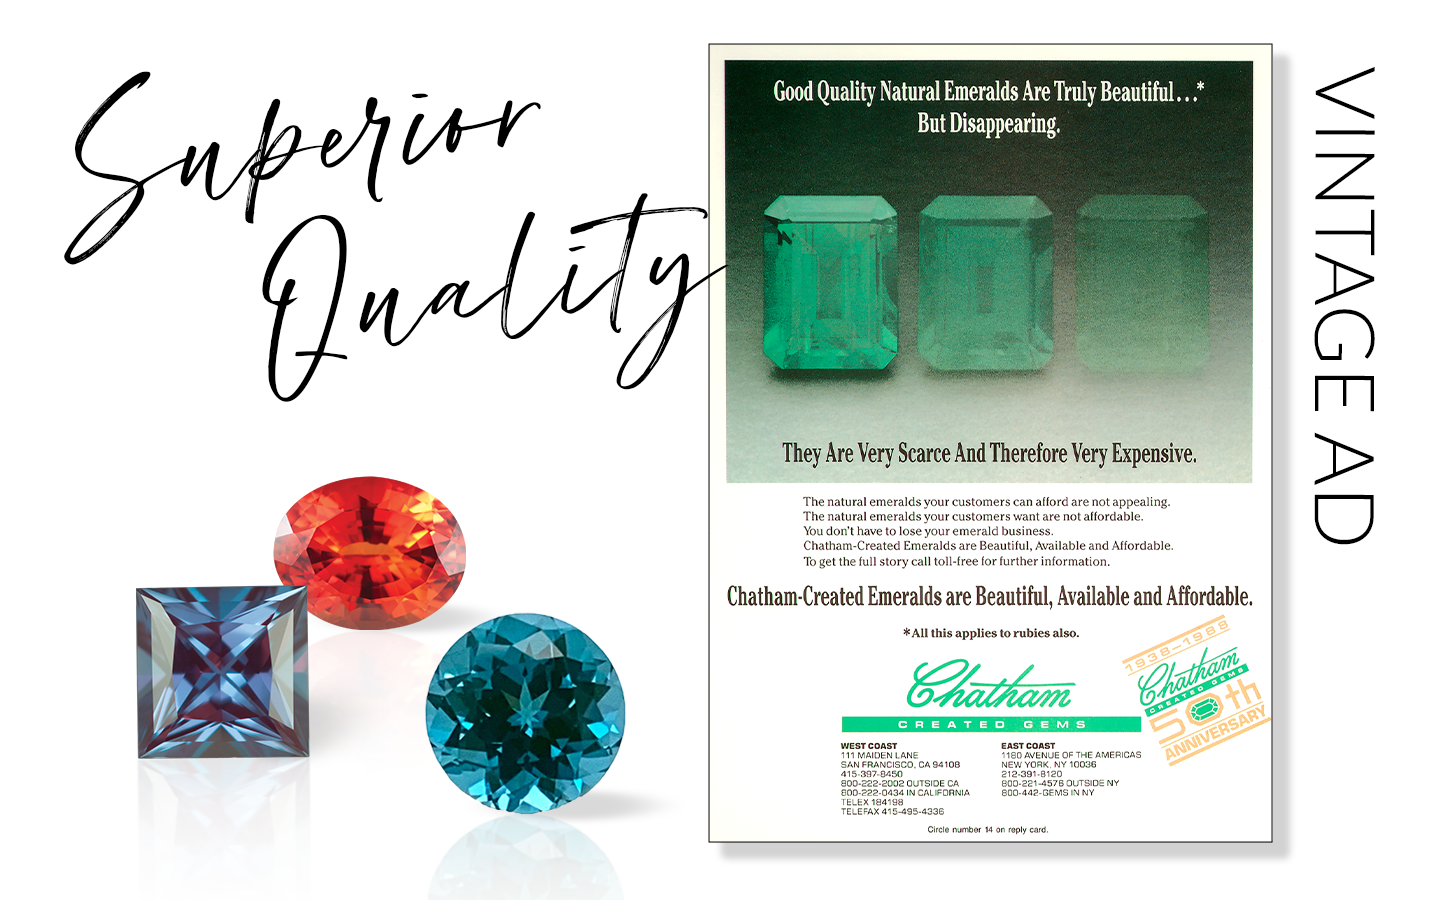 "Superior Quality" Vintage ad titled "Good Quality Natural Emeralds Are Truly Beautiful . . ." But Disappearing. They Are Very Scarce And Therefore Very Expensive. Chatham-Created Emeralds are Beautiful, Available and Affordable.